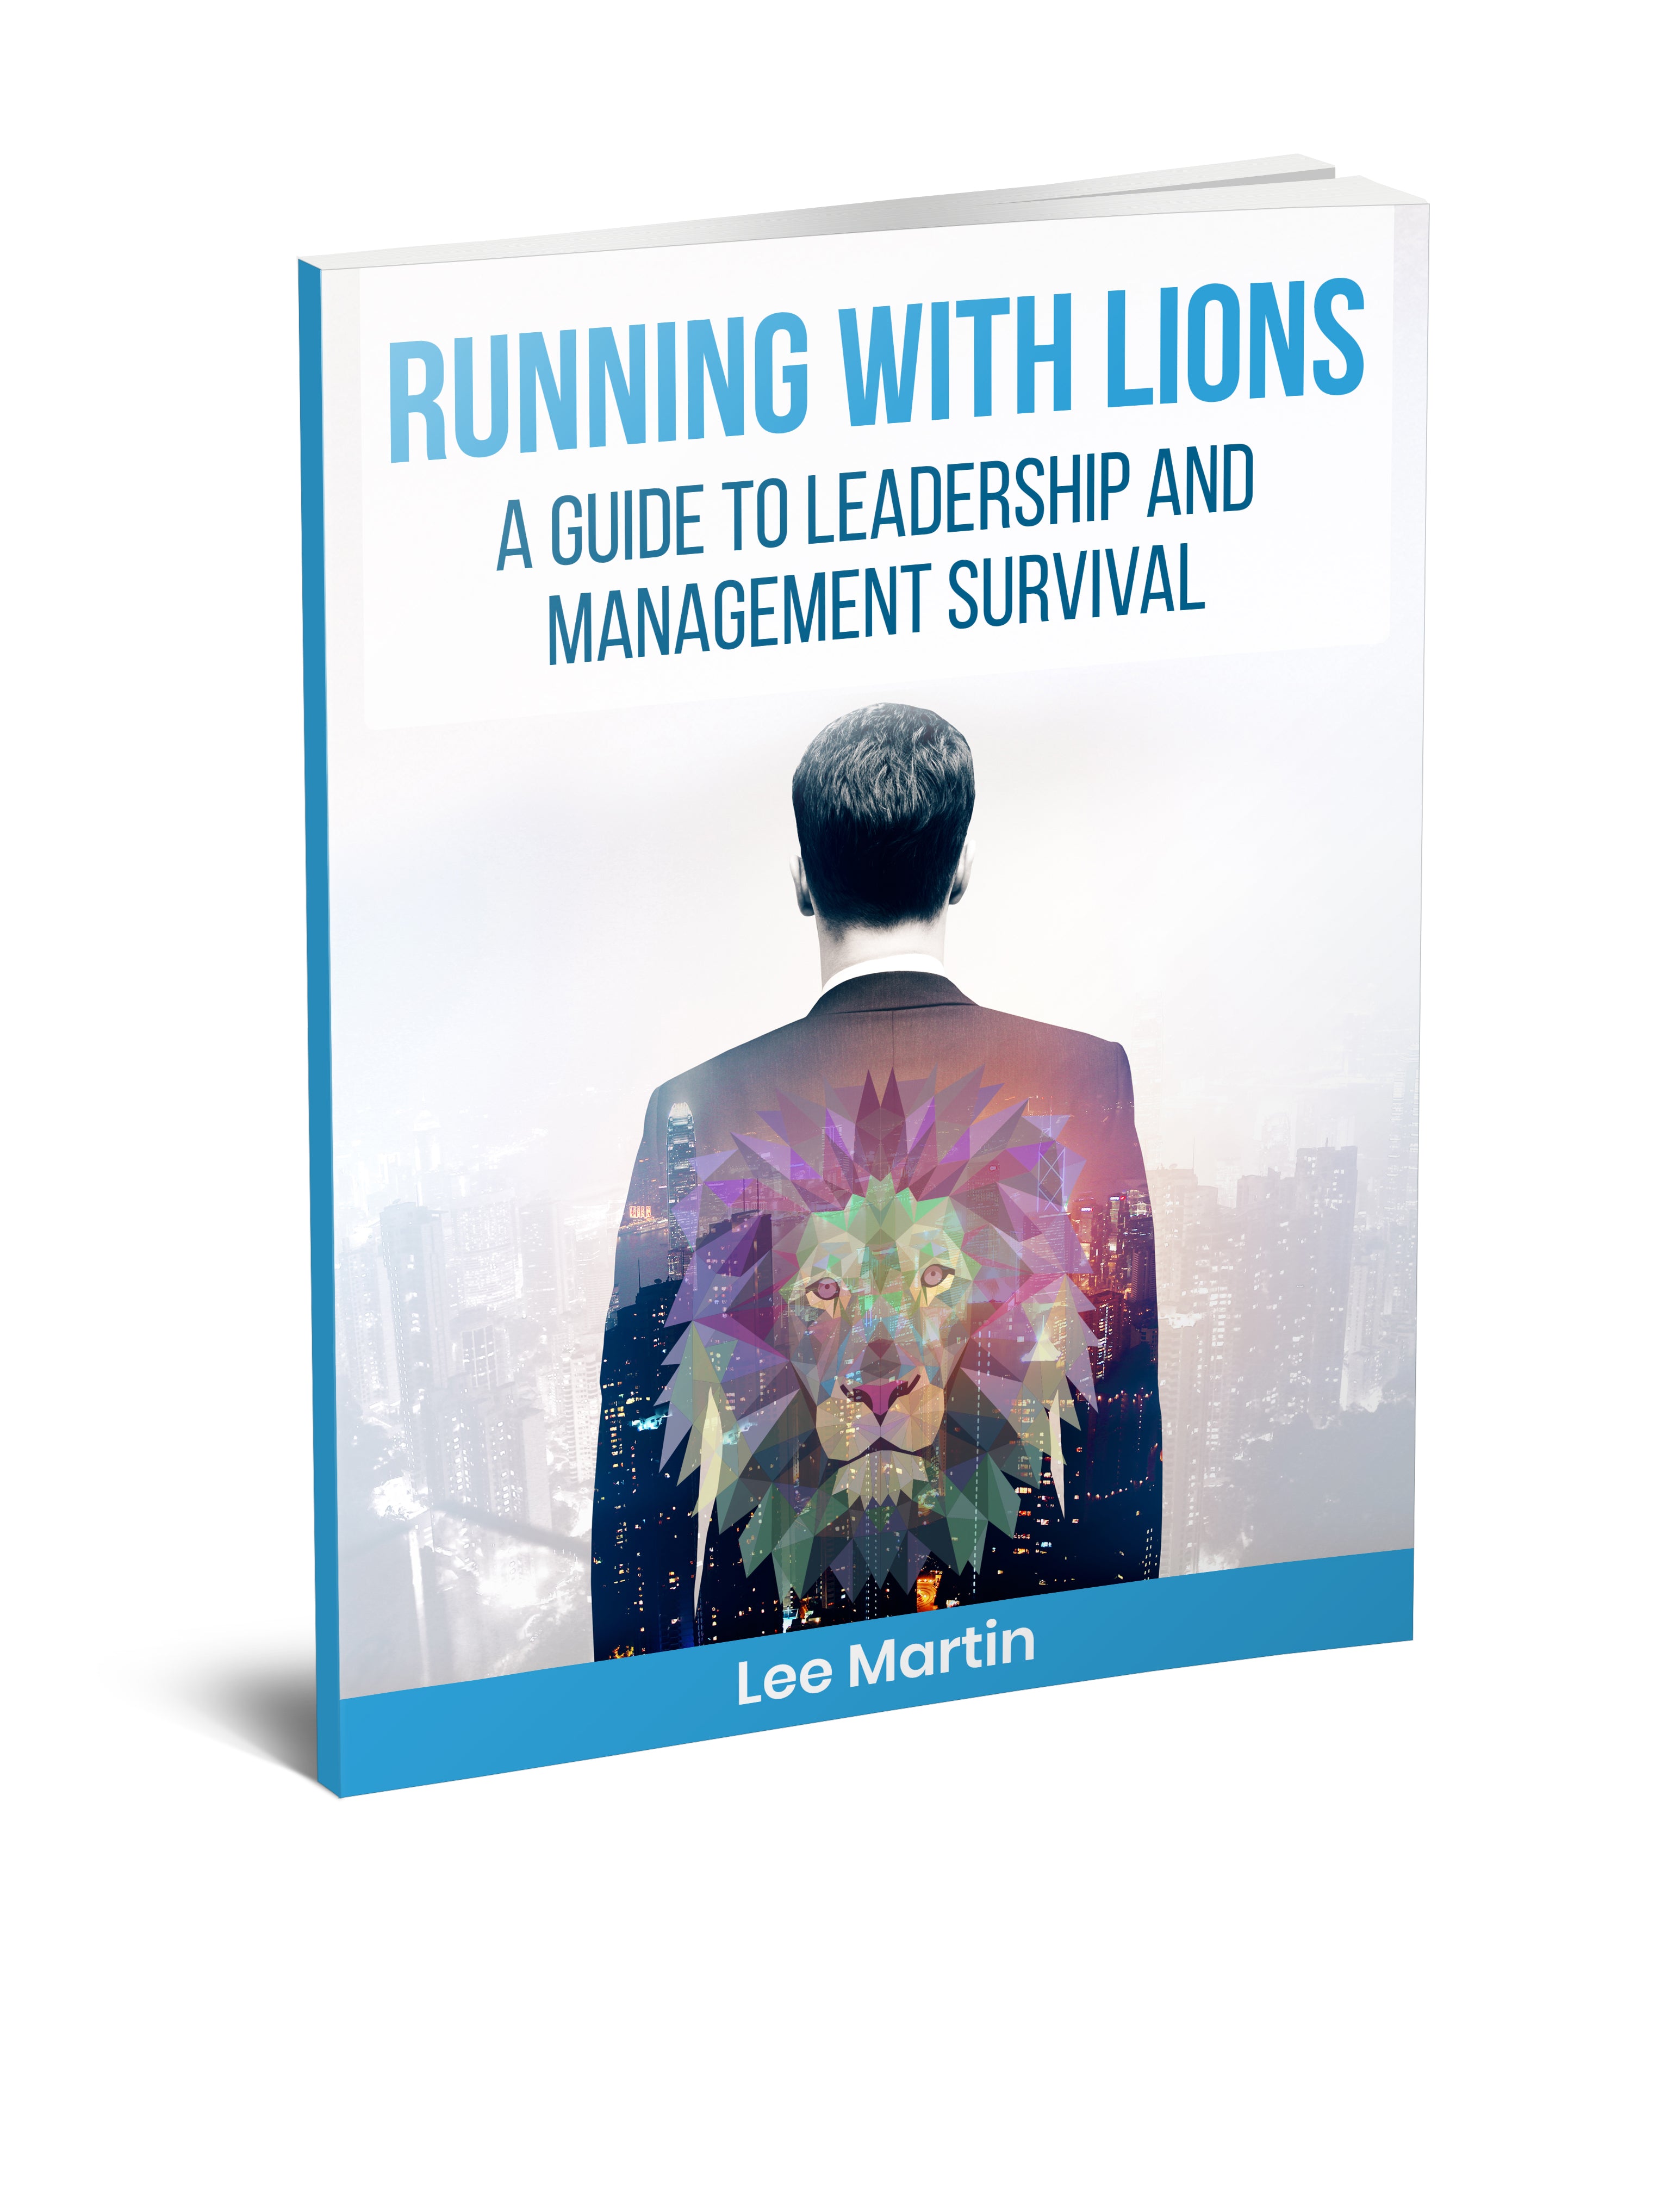 Running with Lions - A Guide to Leadership and Management Survival